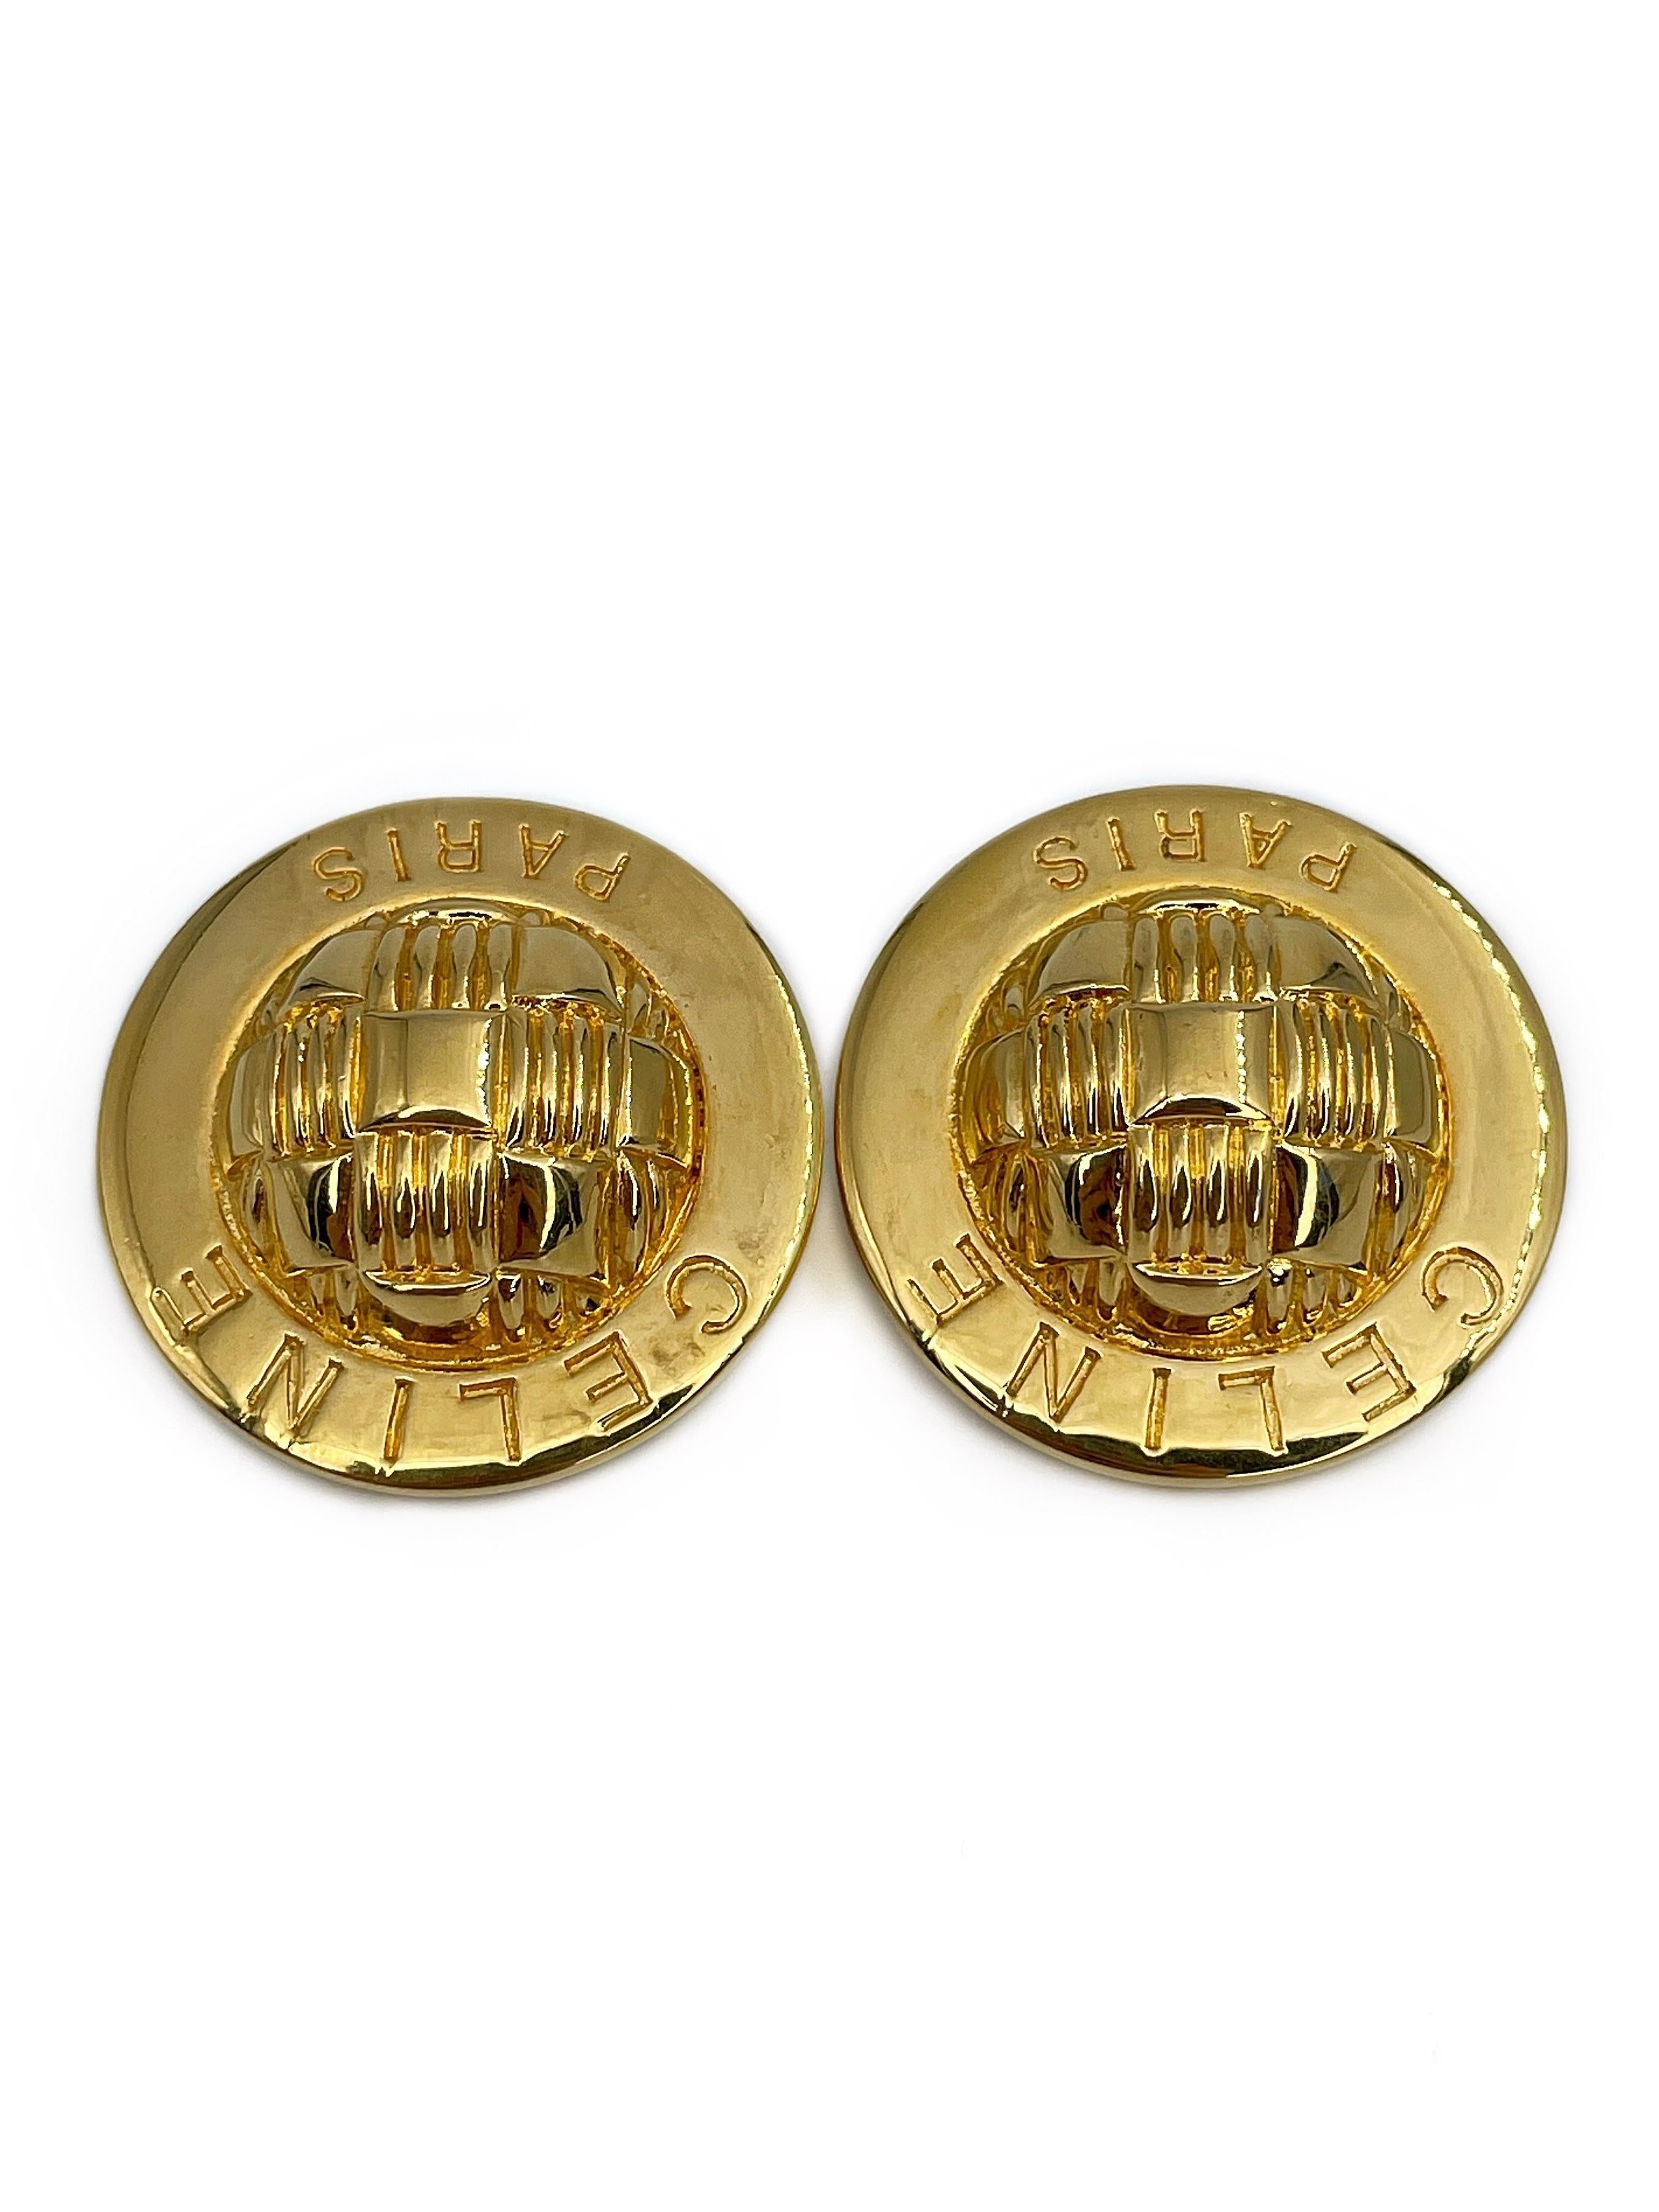 Modern 1980s Vintage Celine Round Dome Gold Tone Clip on Earrings